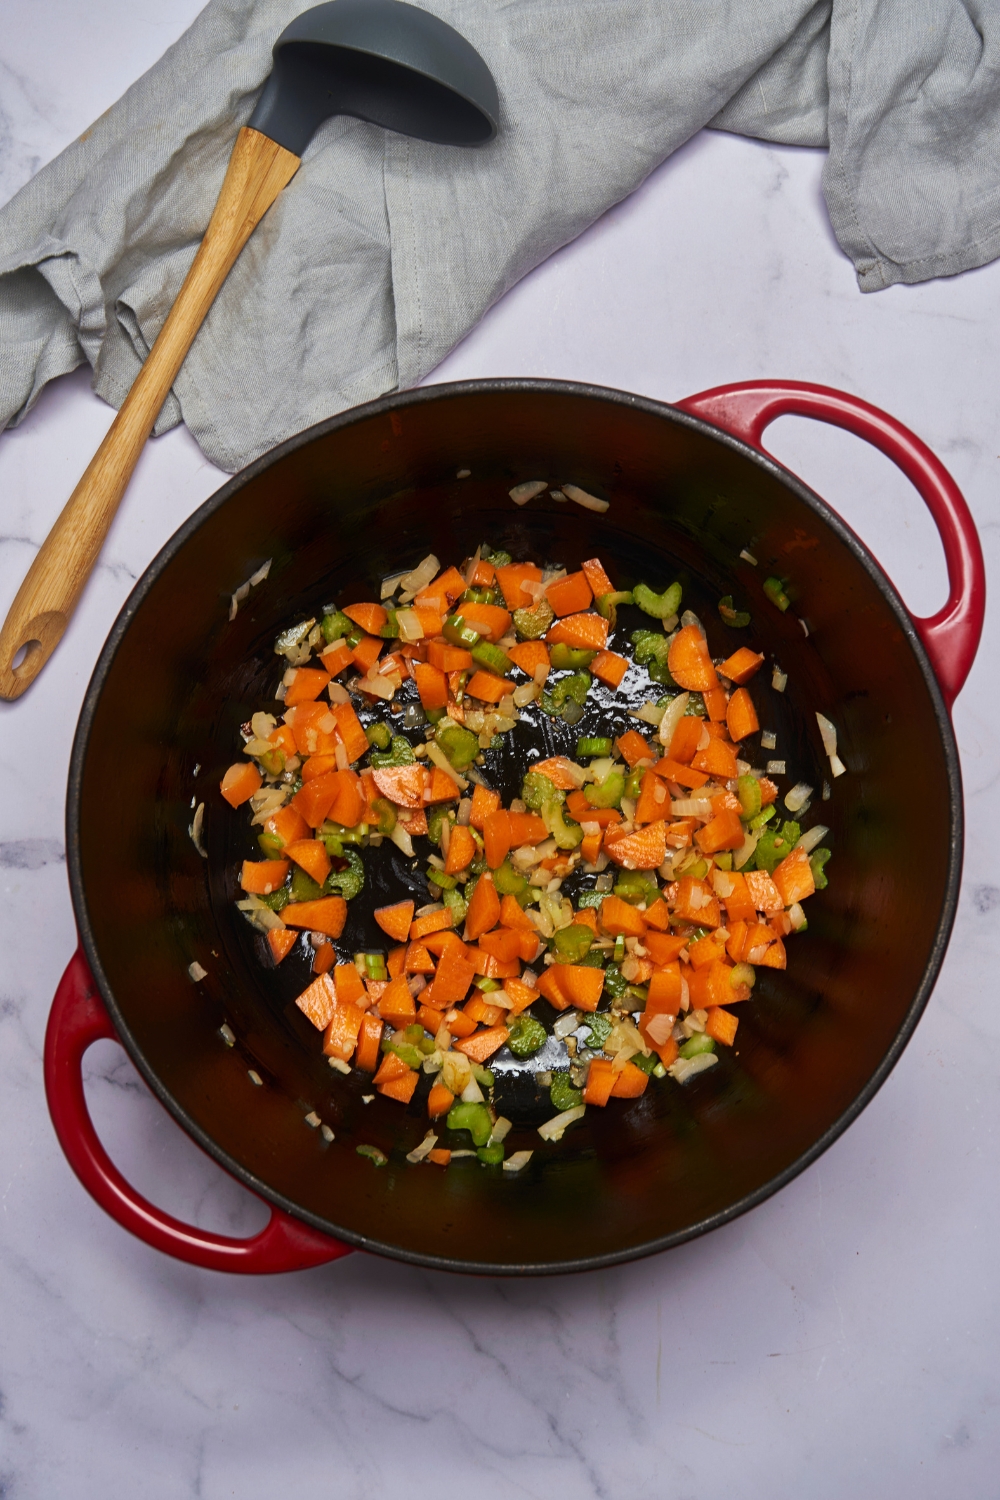 A red pot filled with diced carrot, celery, and onion sautéing in oil.